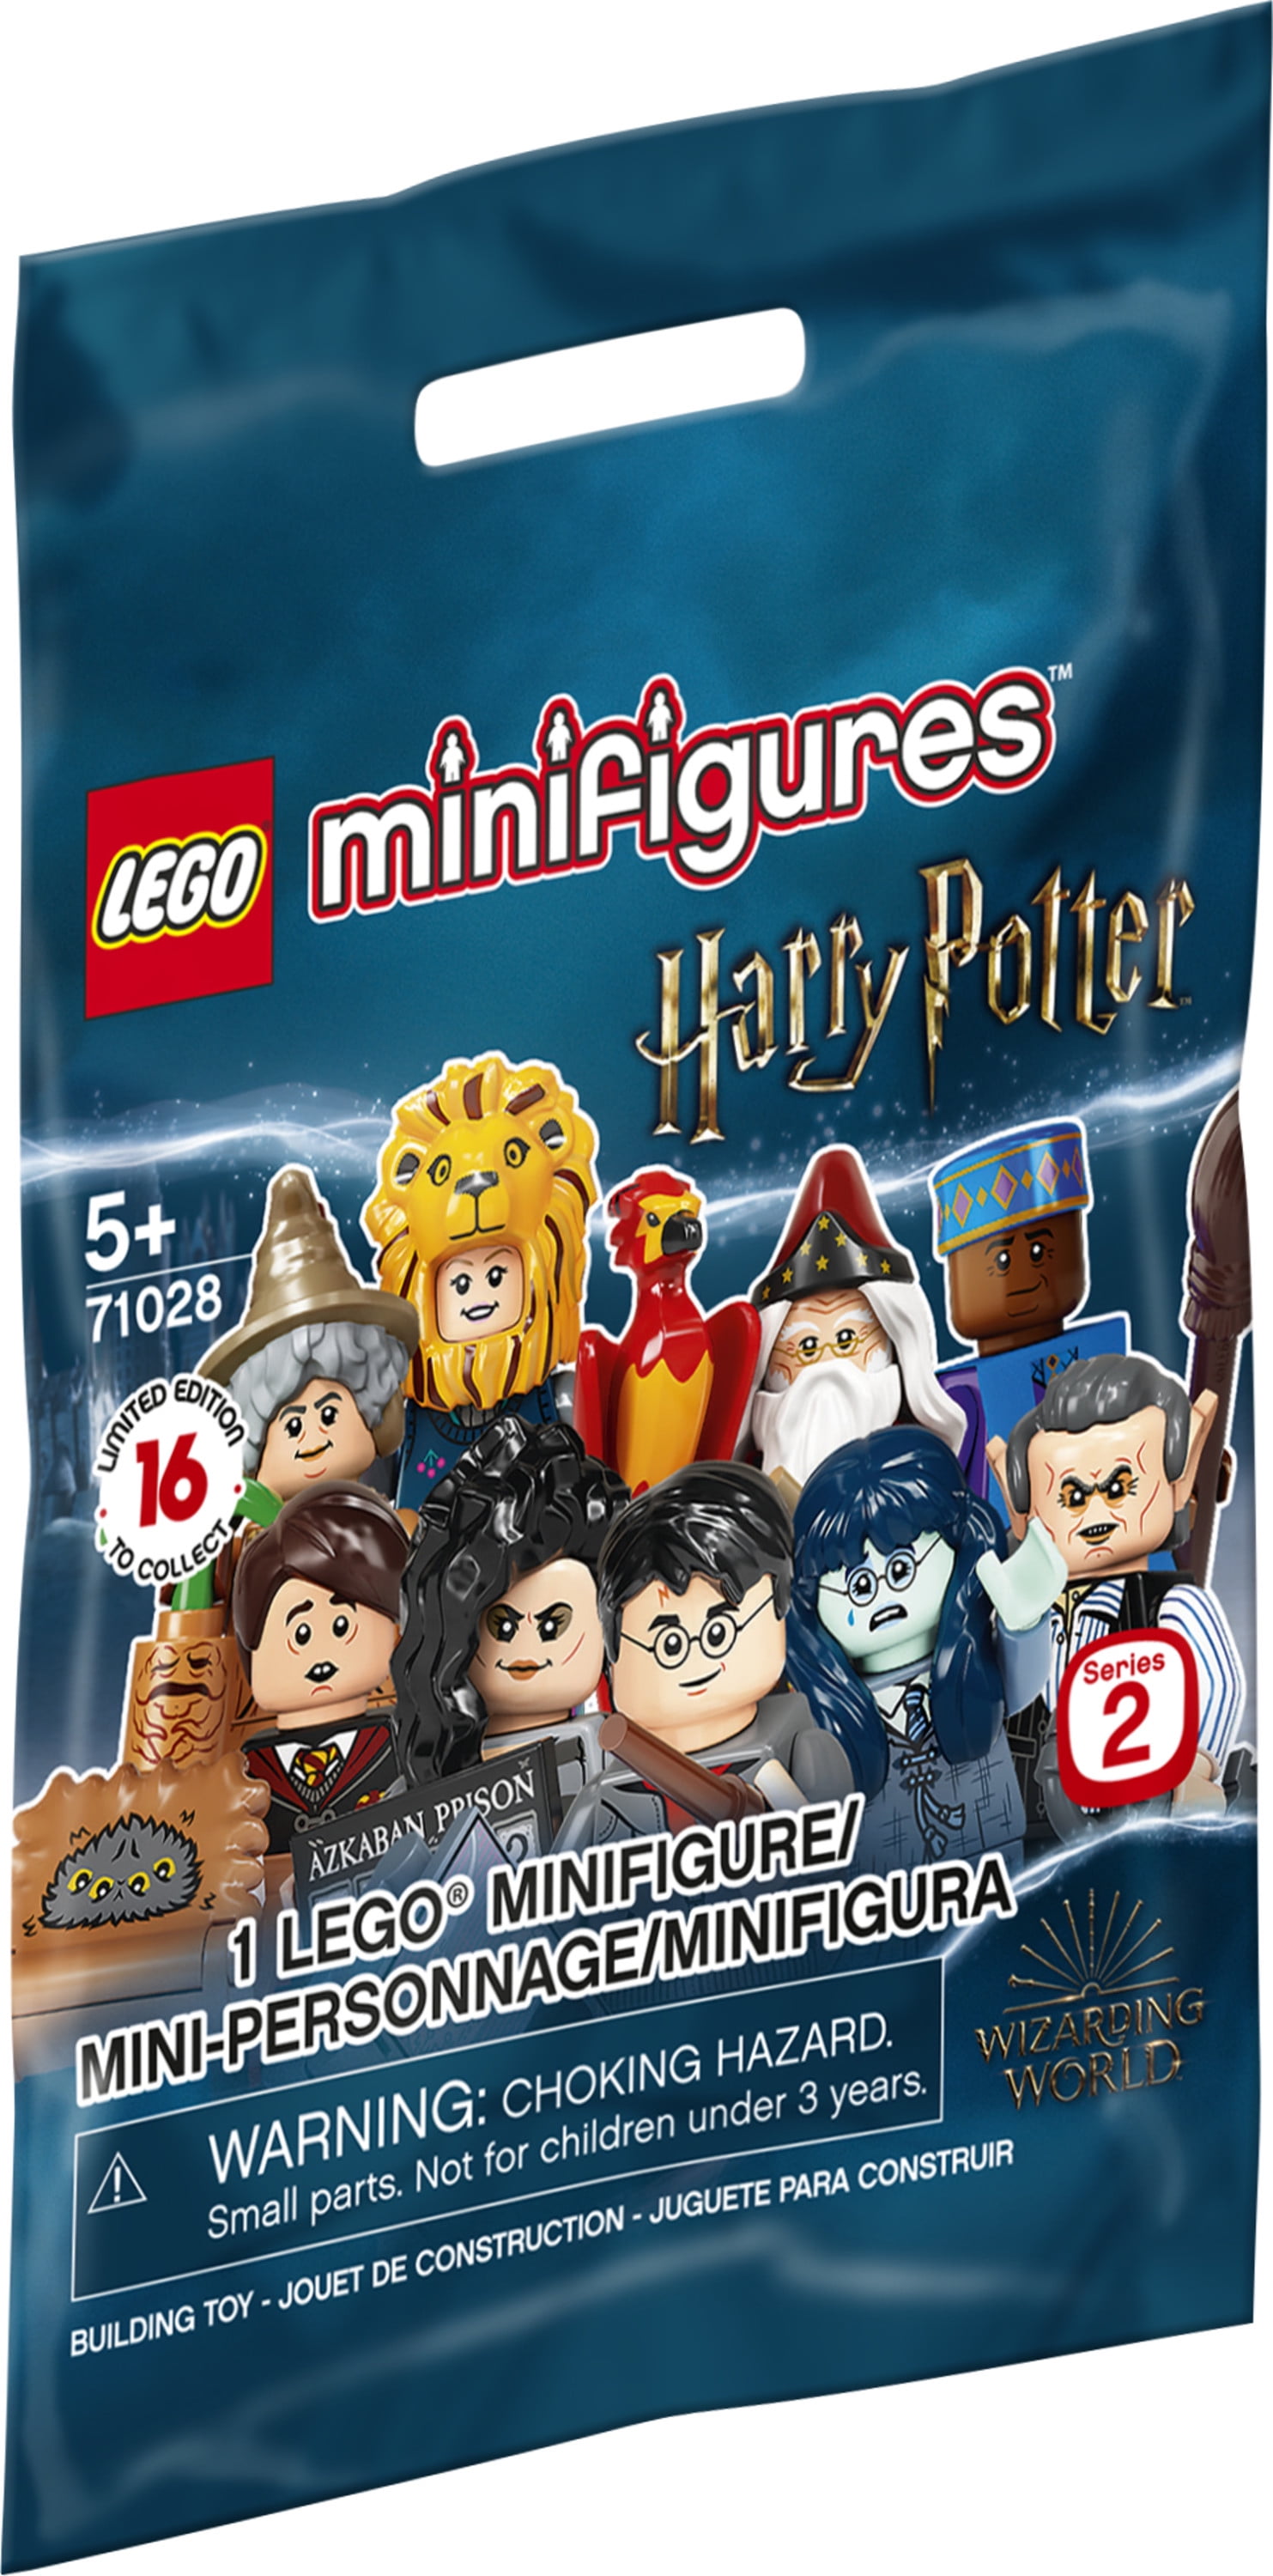 LEGO Minifigures Harry Potter Series 2 Building Kit Toys of 16 to Collect) (1 Lego Minifigure) - Walmart.com